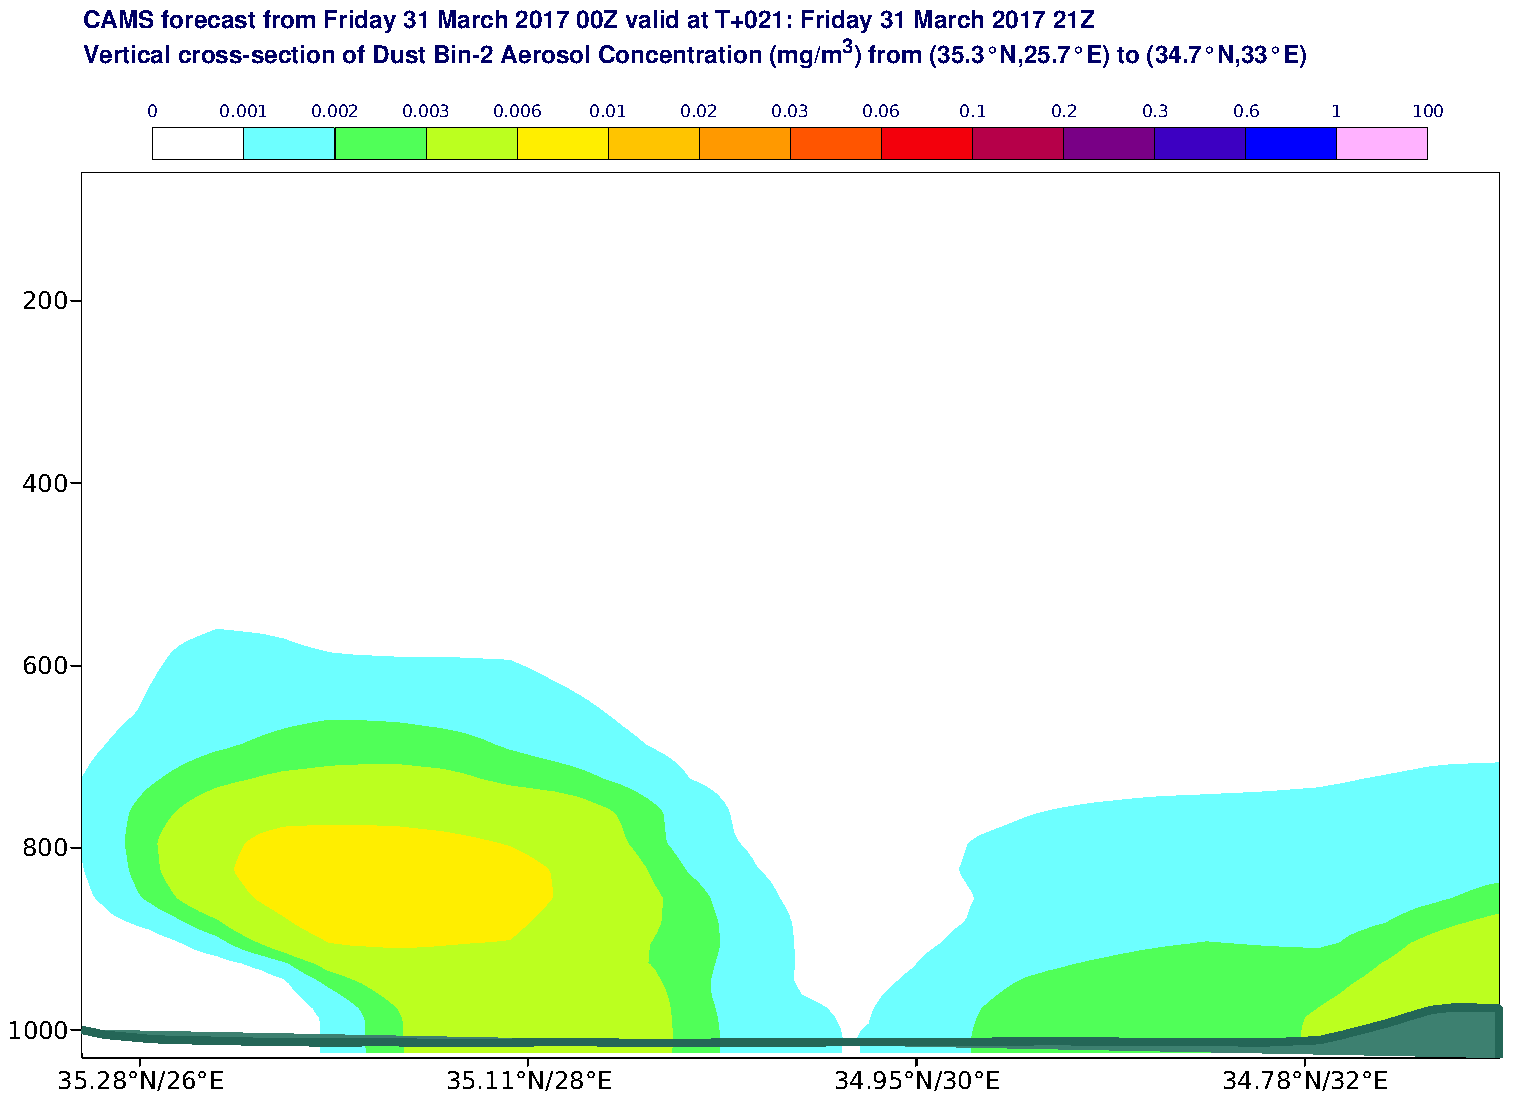 Vertical cross-section of Dust Bin-2 Aerosol Concentration (mg/m3) valid at T21 - 2017-03-31 21:00